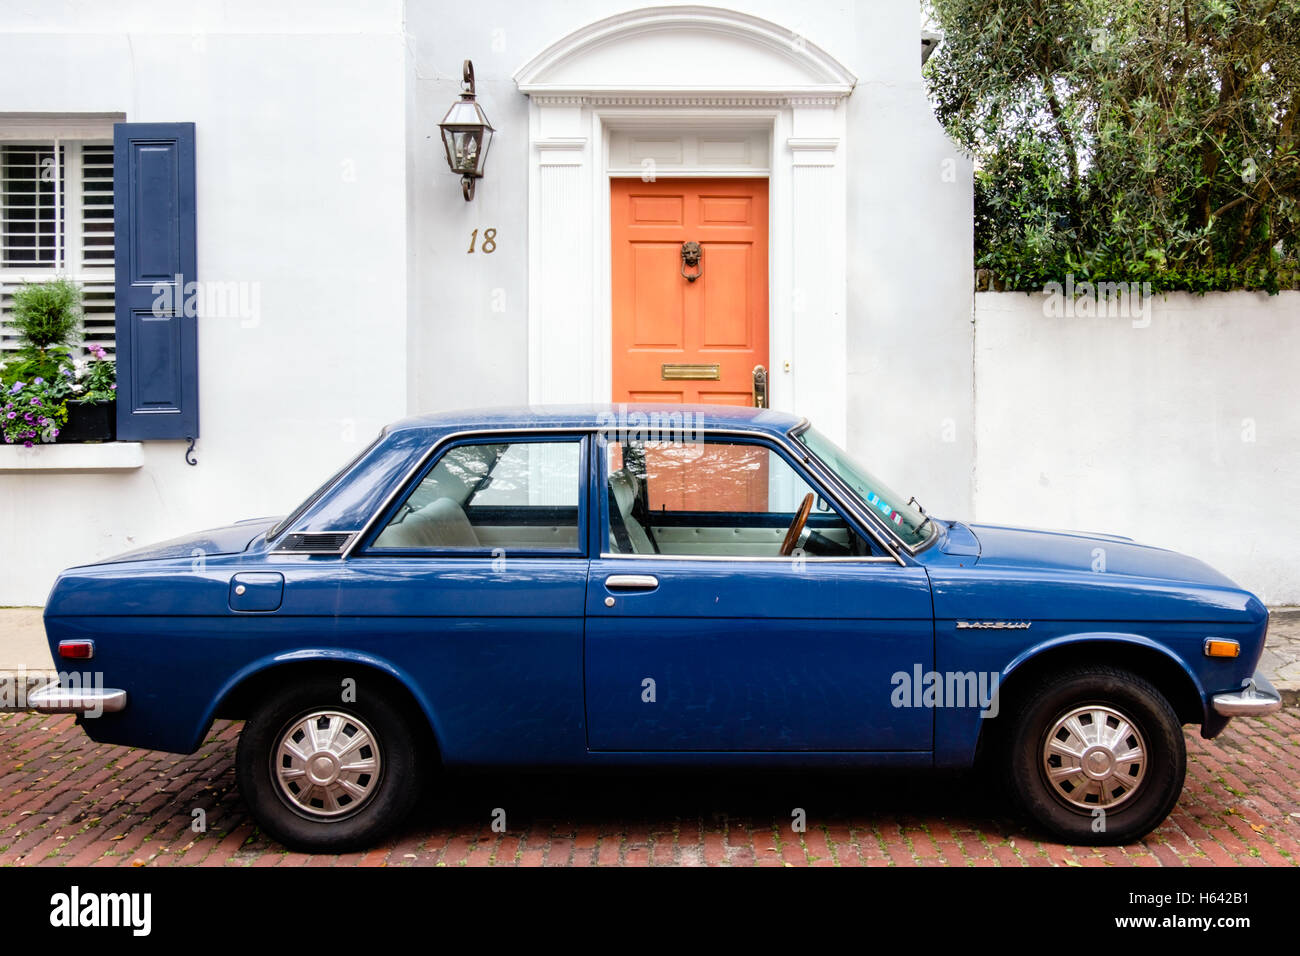 Antique Datsun parked in front of an old home in the Charleston Historic District, South Carolina Stock Photo